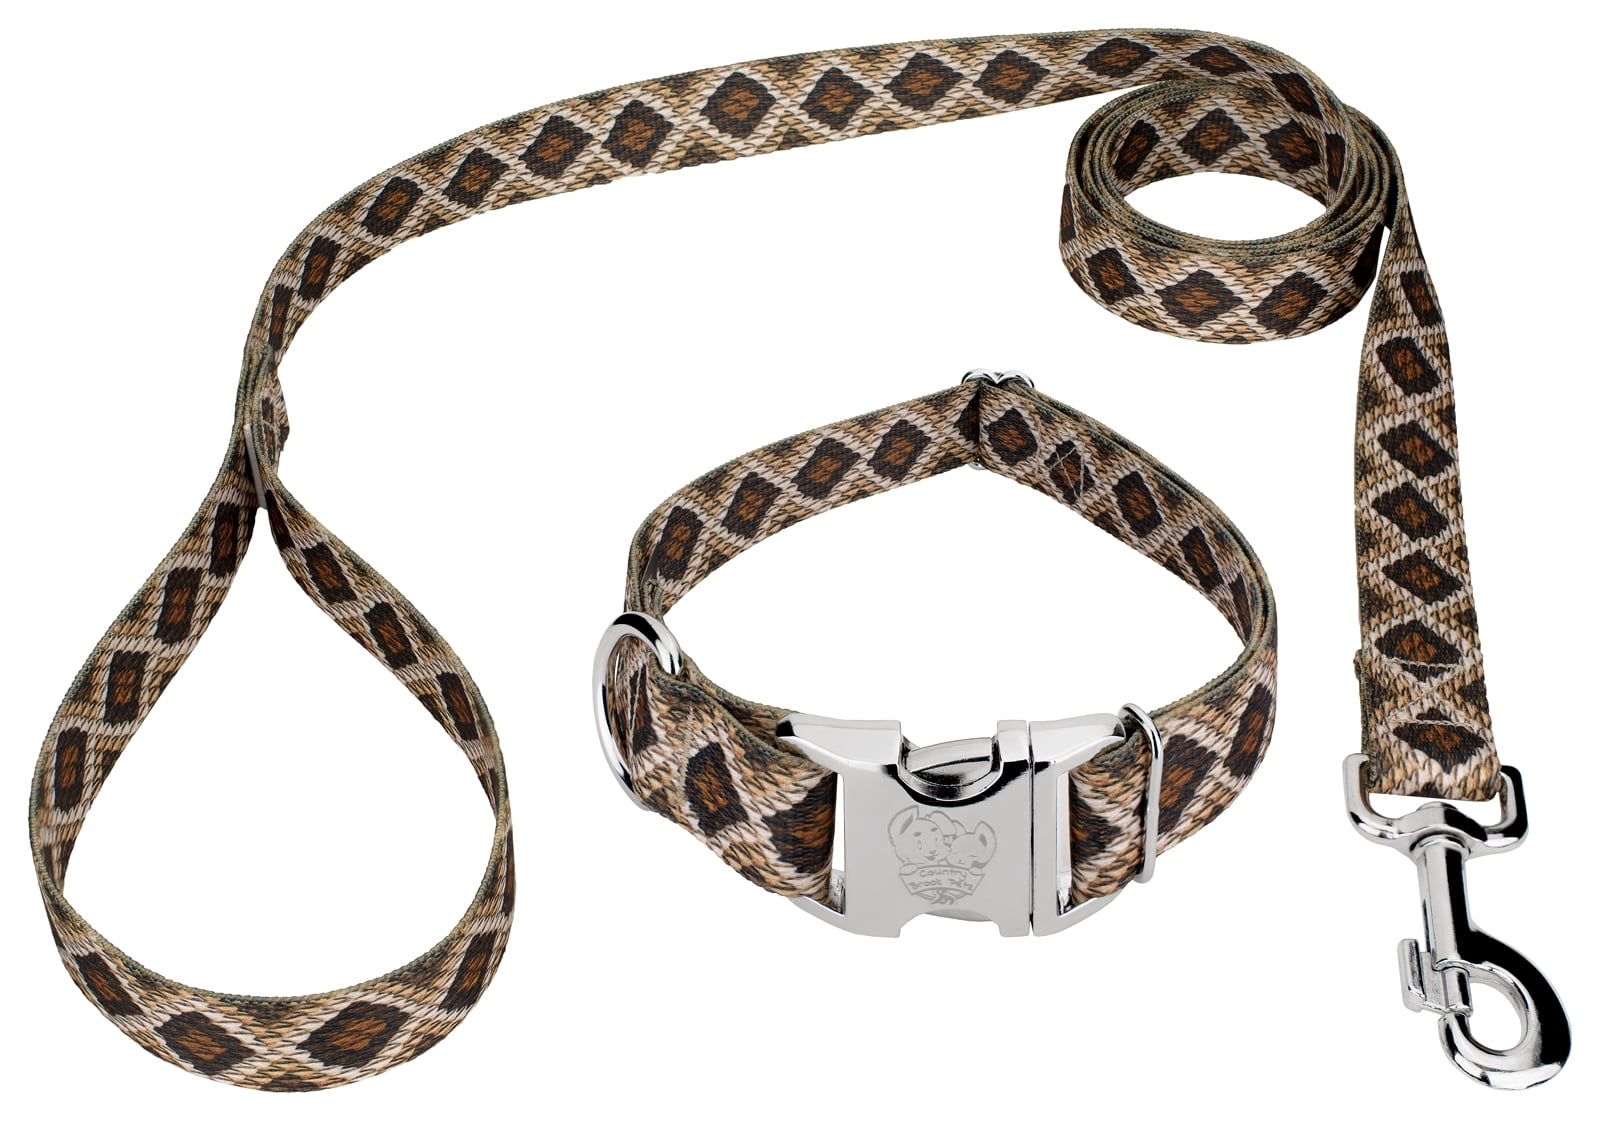 Country Brook Petz Premium Rattlesnake Dog Collar, Size: Large 1in W - Fits 16in-22in